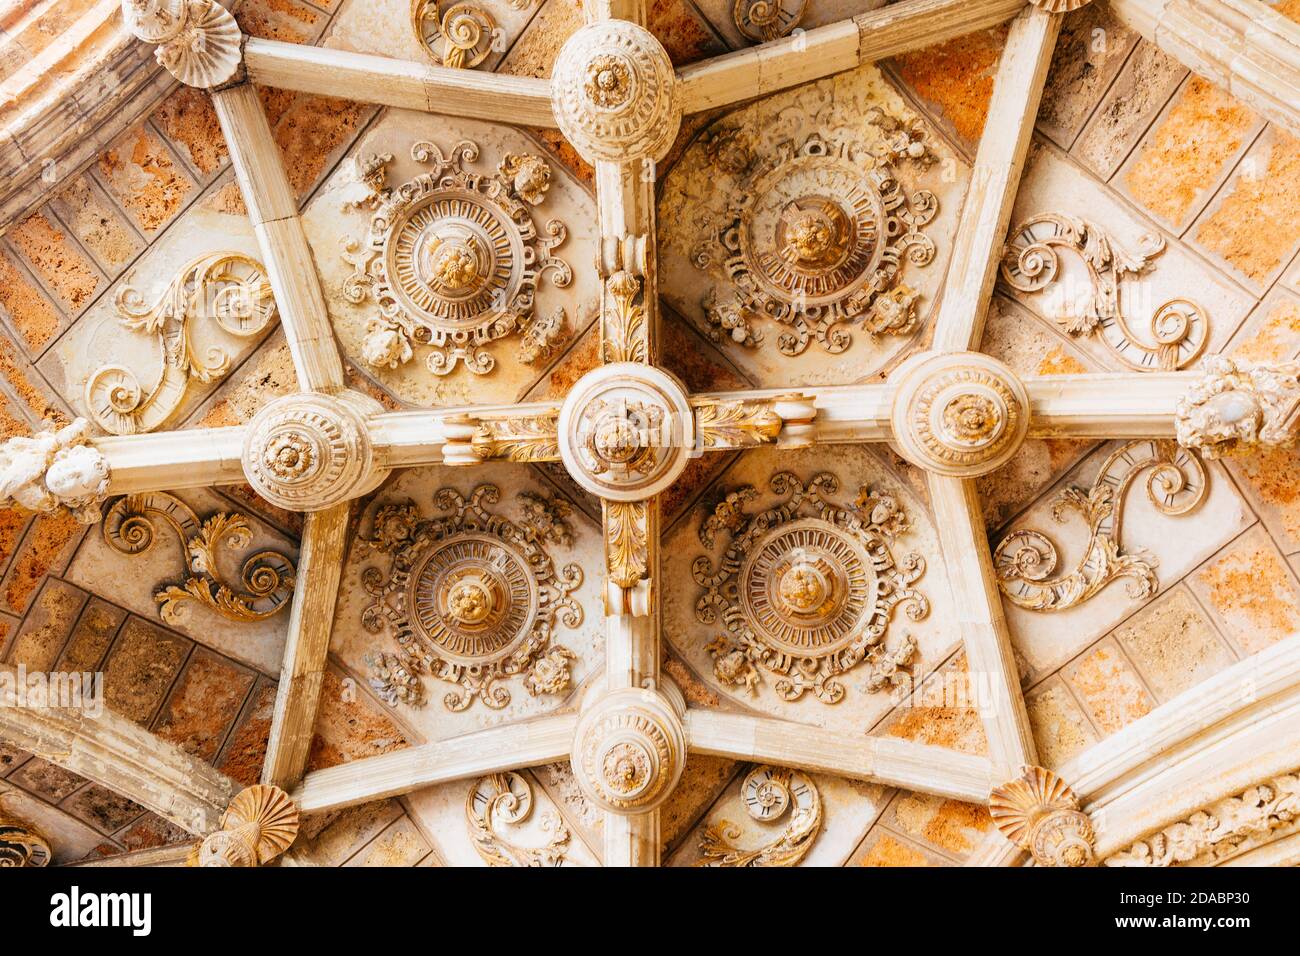 Cloister of the cathedral of León, Vaulted Ceiling. León's gothic Cathedral, also called The House of Light or the Pulchra Leonina. French Way, Way of Stock Photo